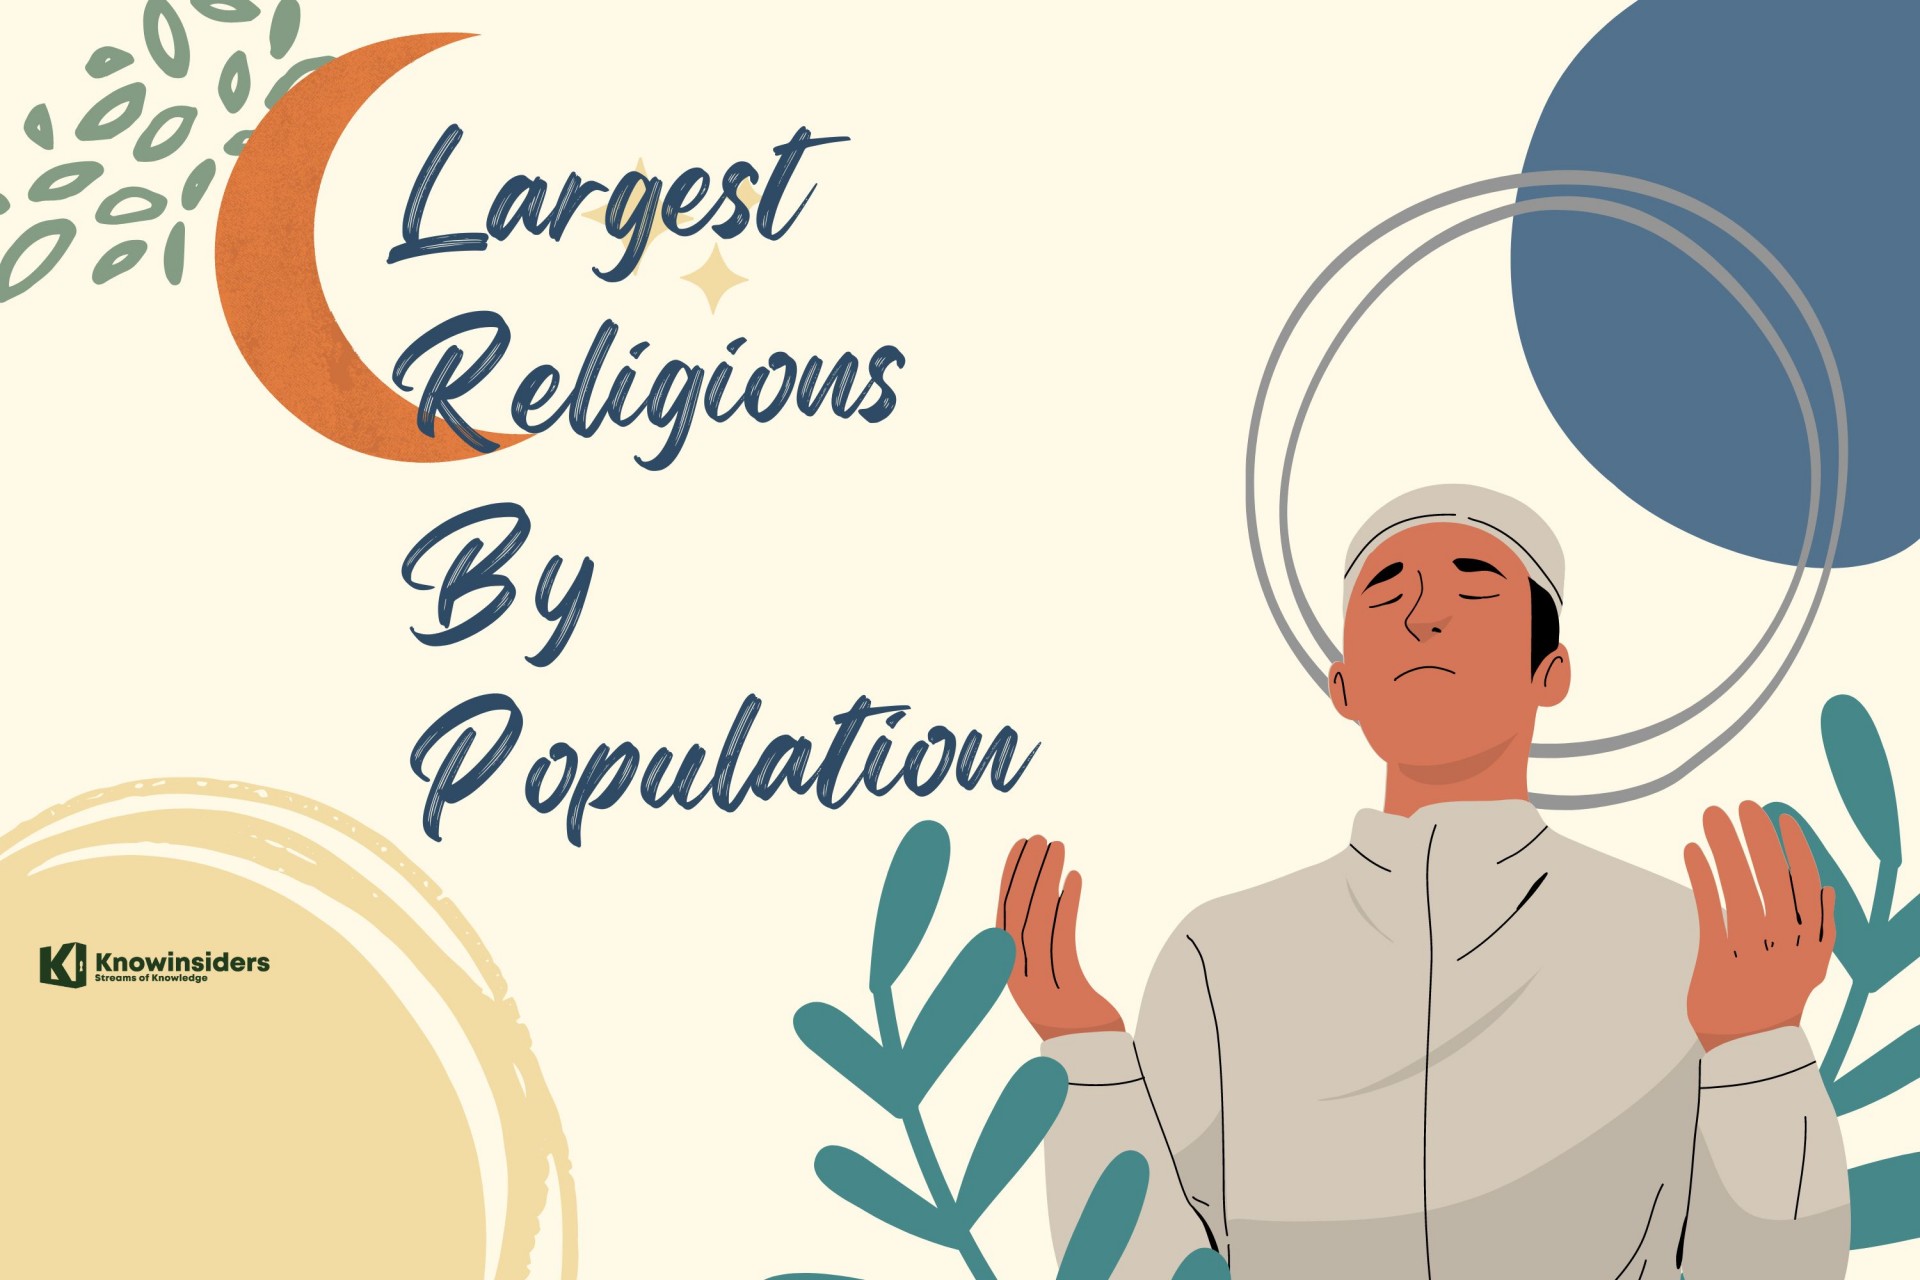 Top 10 Largest Religions In The World By Population